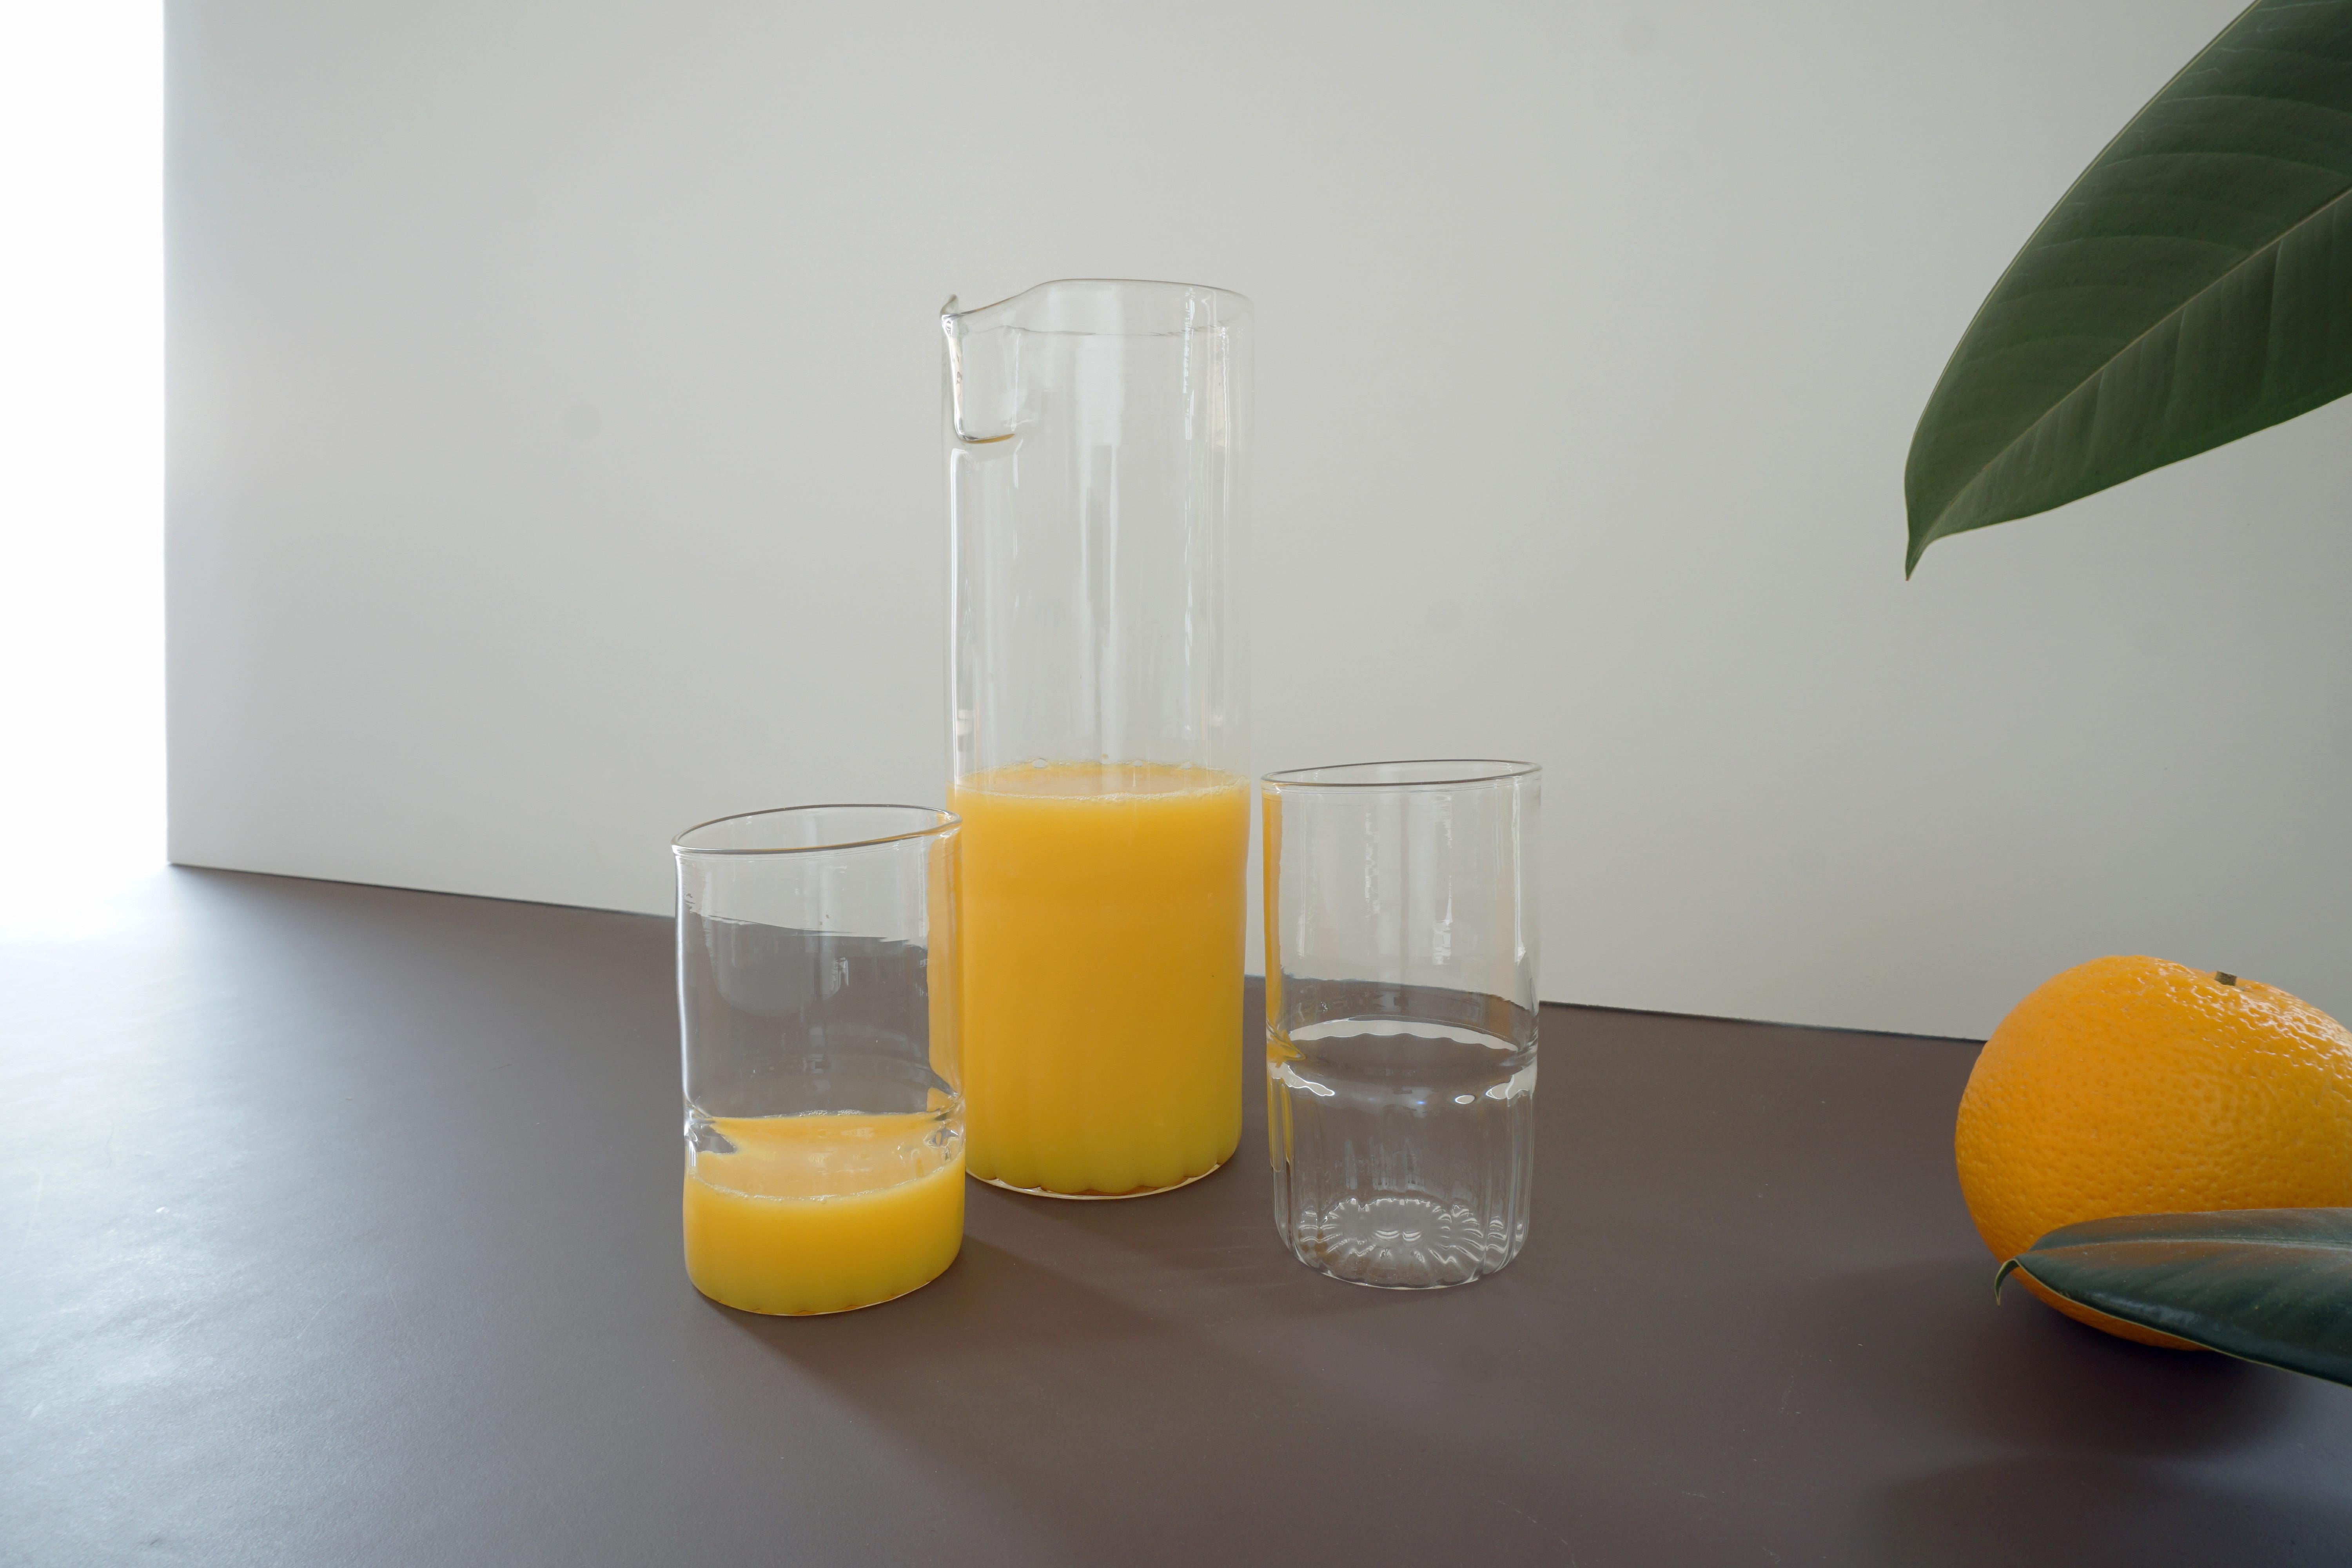 Set of two tumblers with carafe / pitcher. 
Each piece is hand blown in borosilicate glass also knows as Pyrex. Each piece is unique with its own character.

Materials: 
Borosilicate glass

Dimensions: 
Tumblers 
5cm x 5cm x 9cm 
2